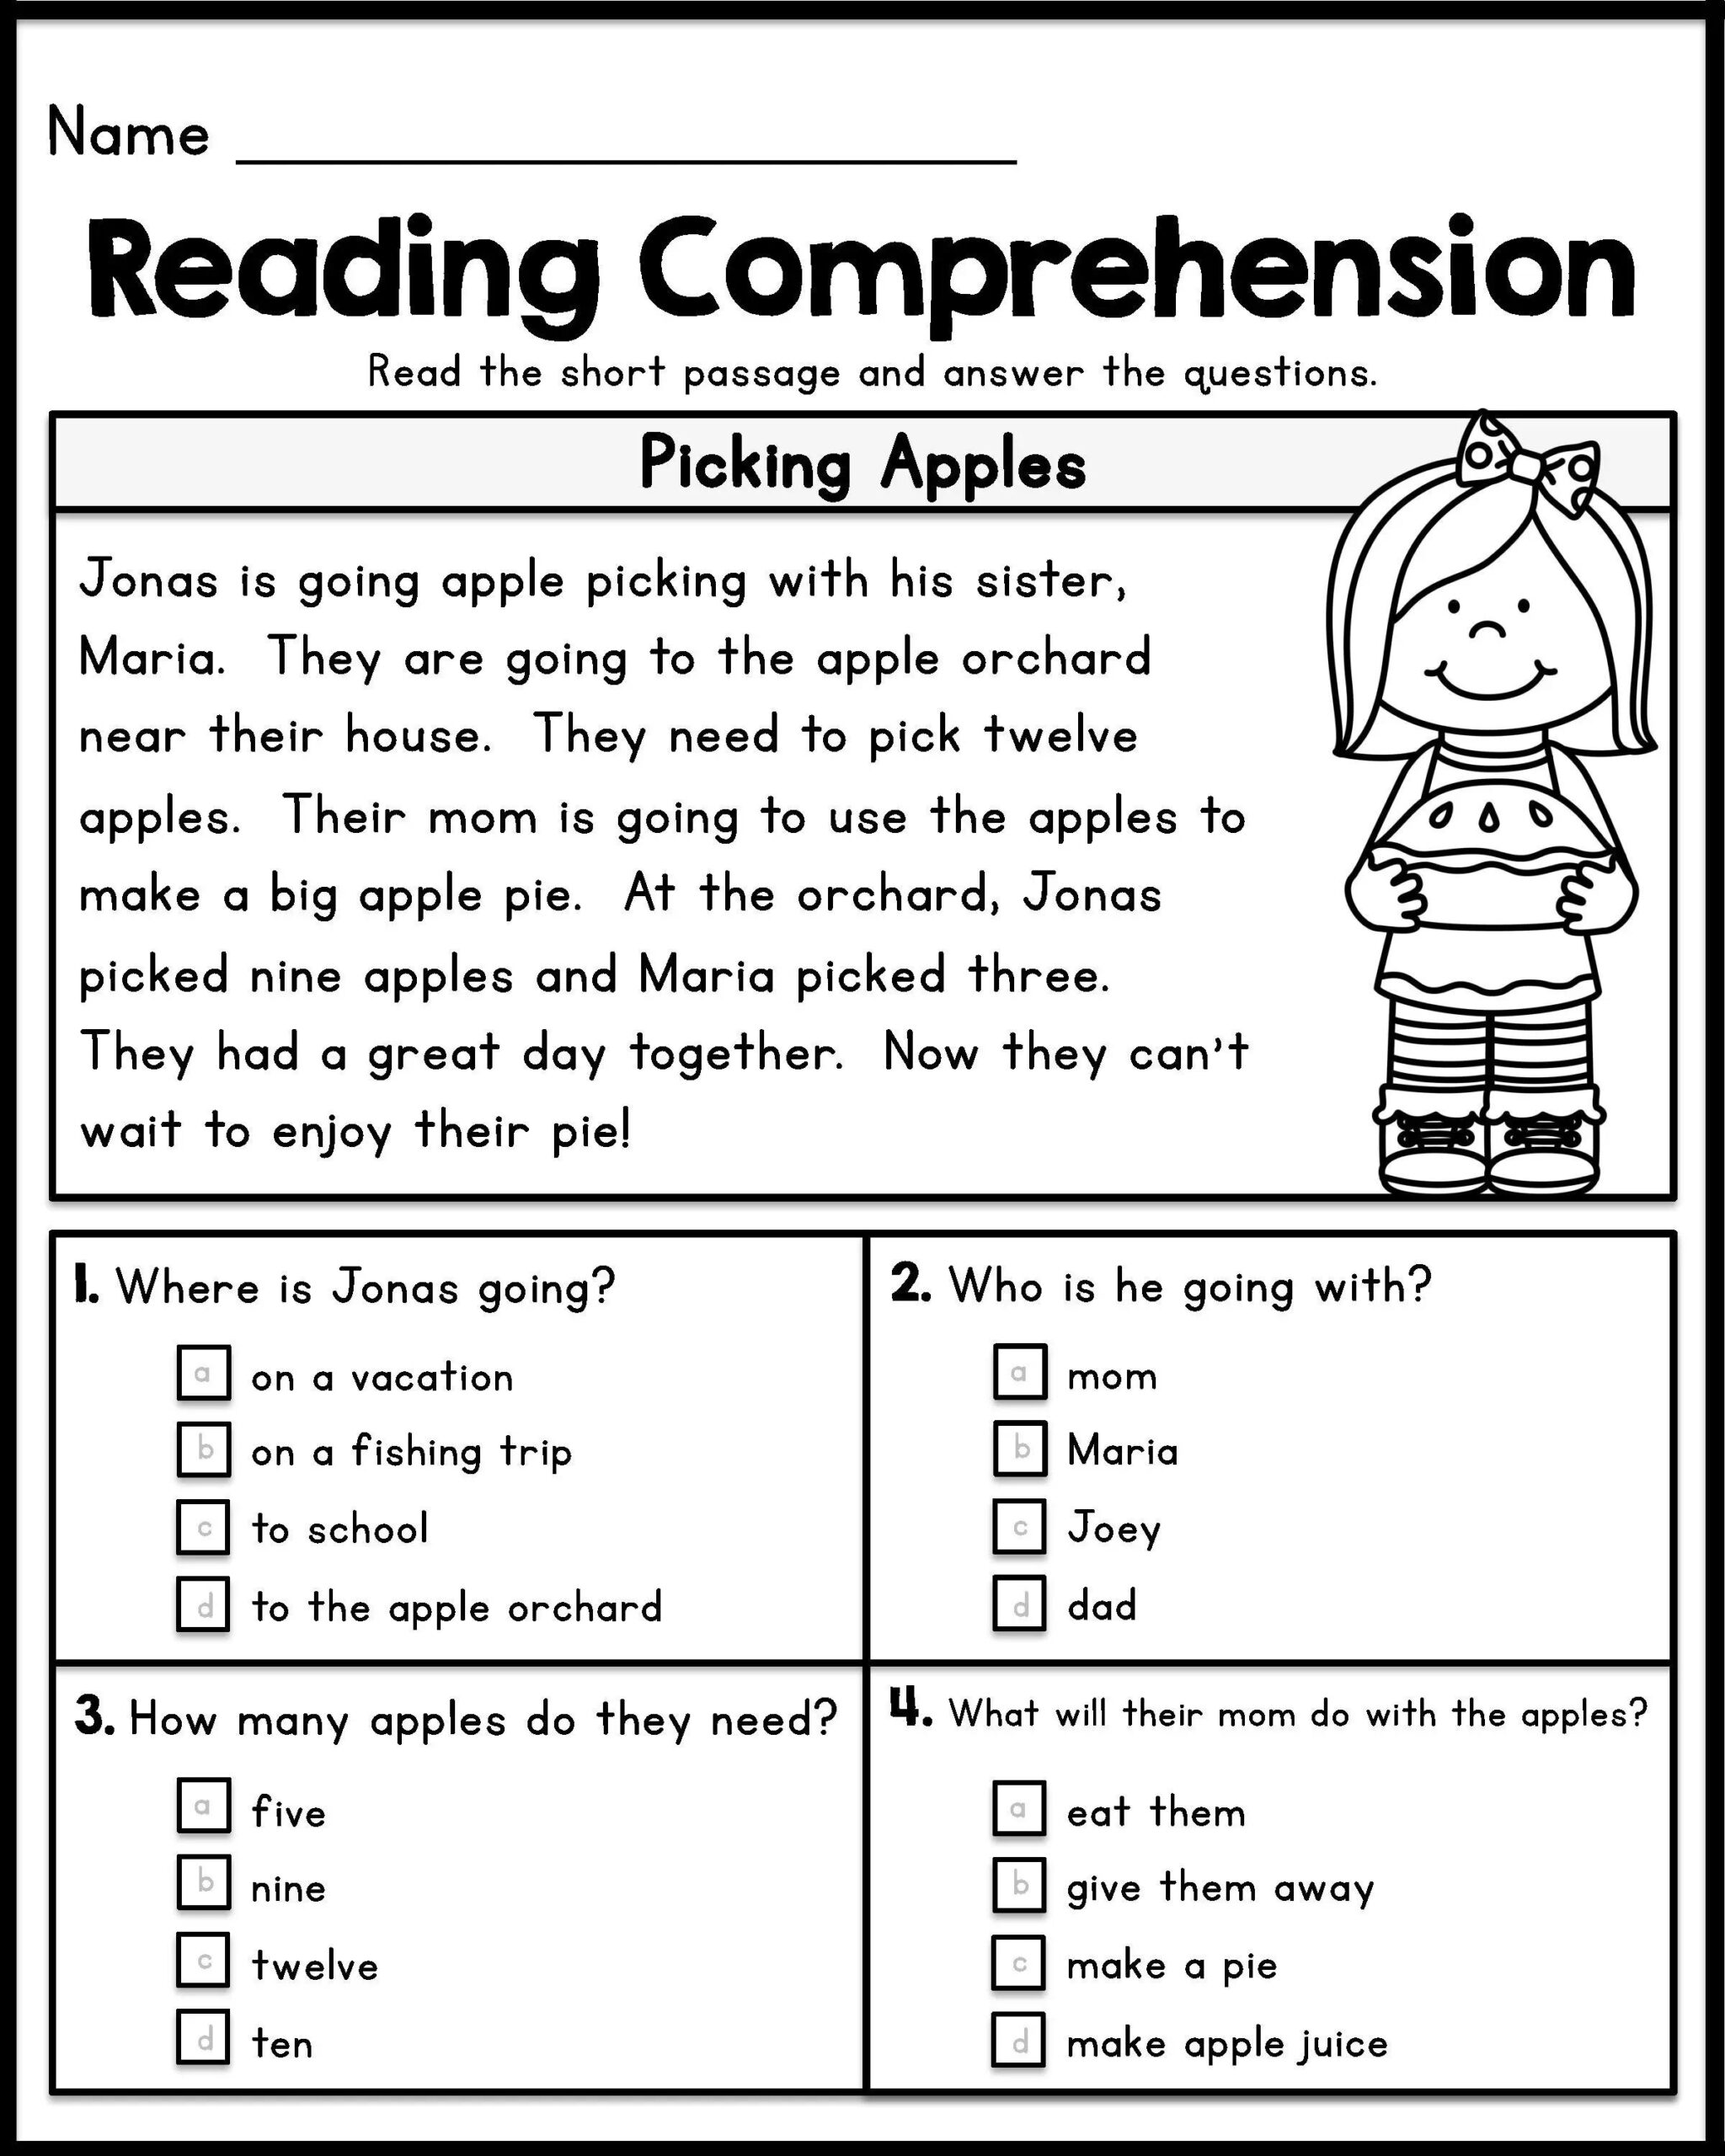 Free Printable Reading Comprehension Worksheets For 8th Grade